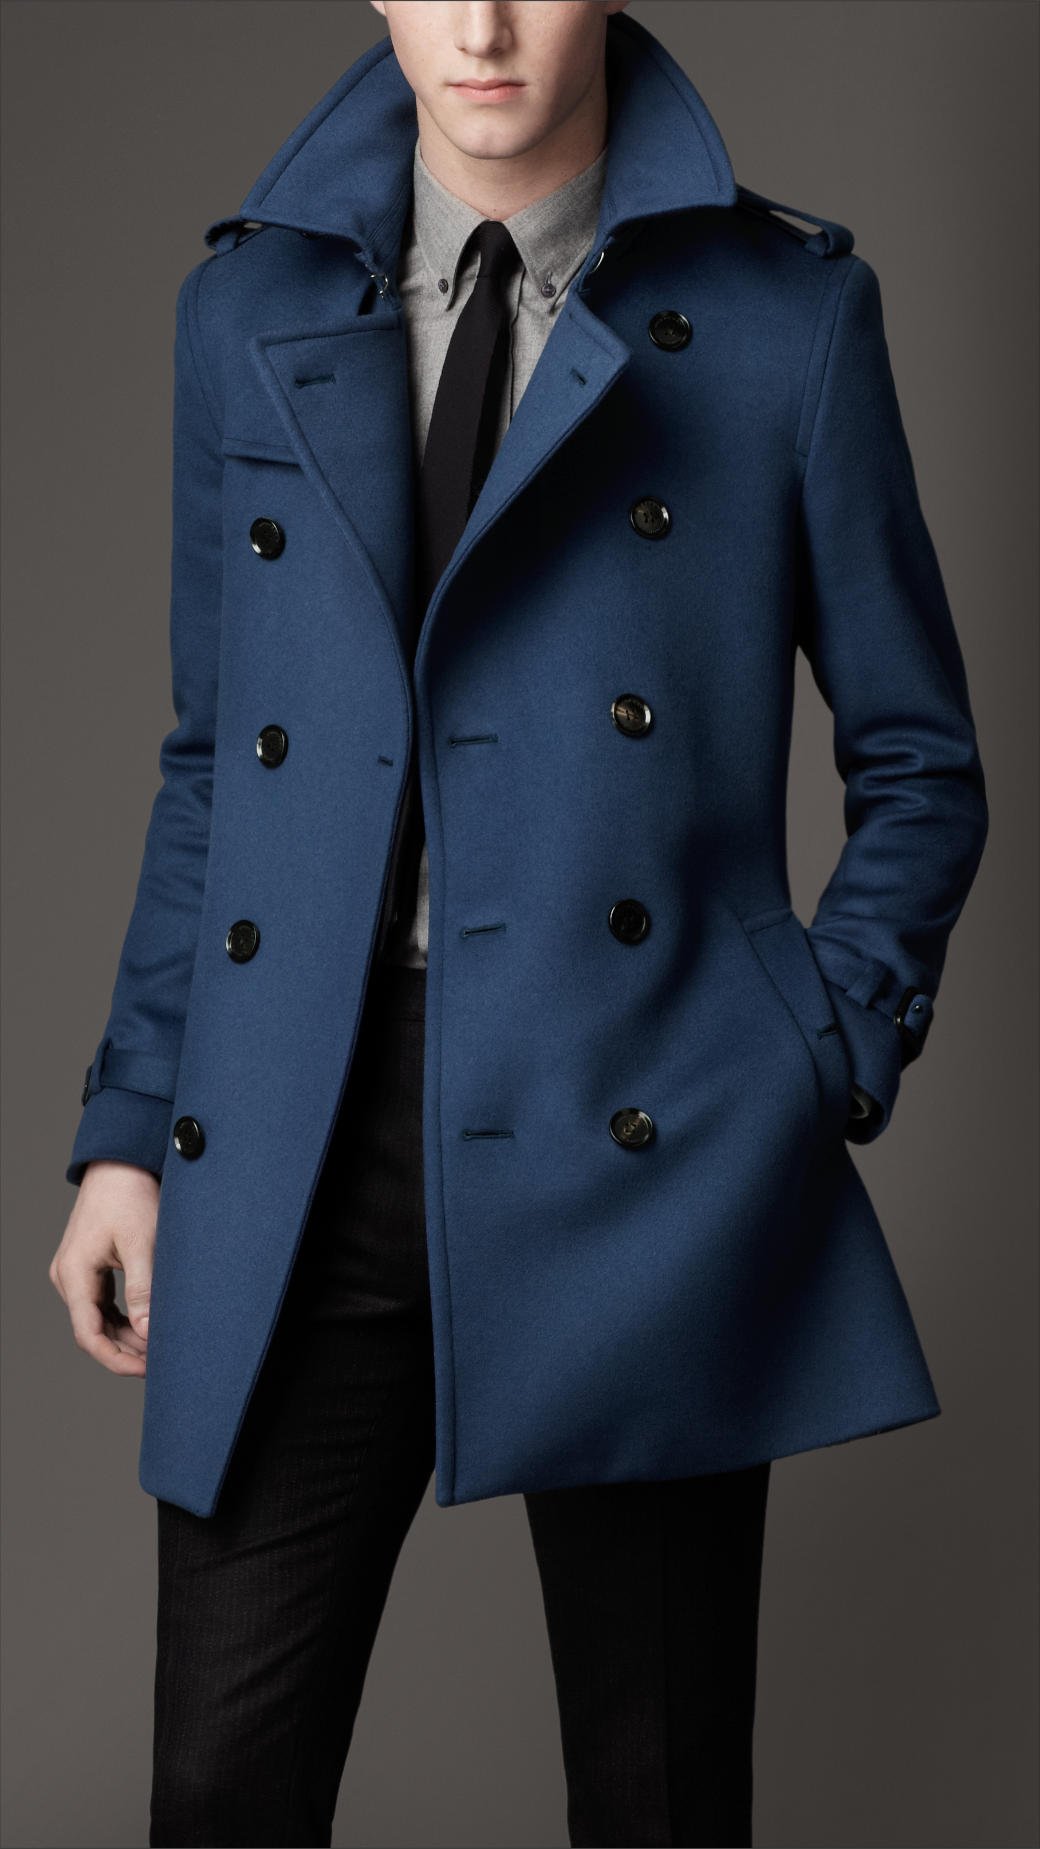 Burberry Wool Trench Coat in Blue for Men - Lyst